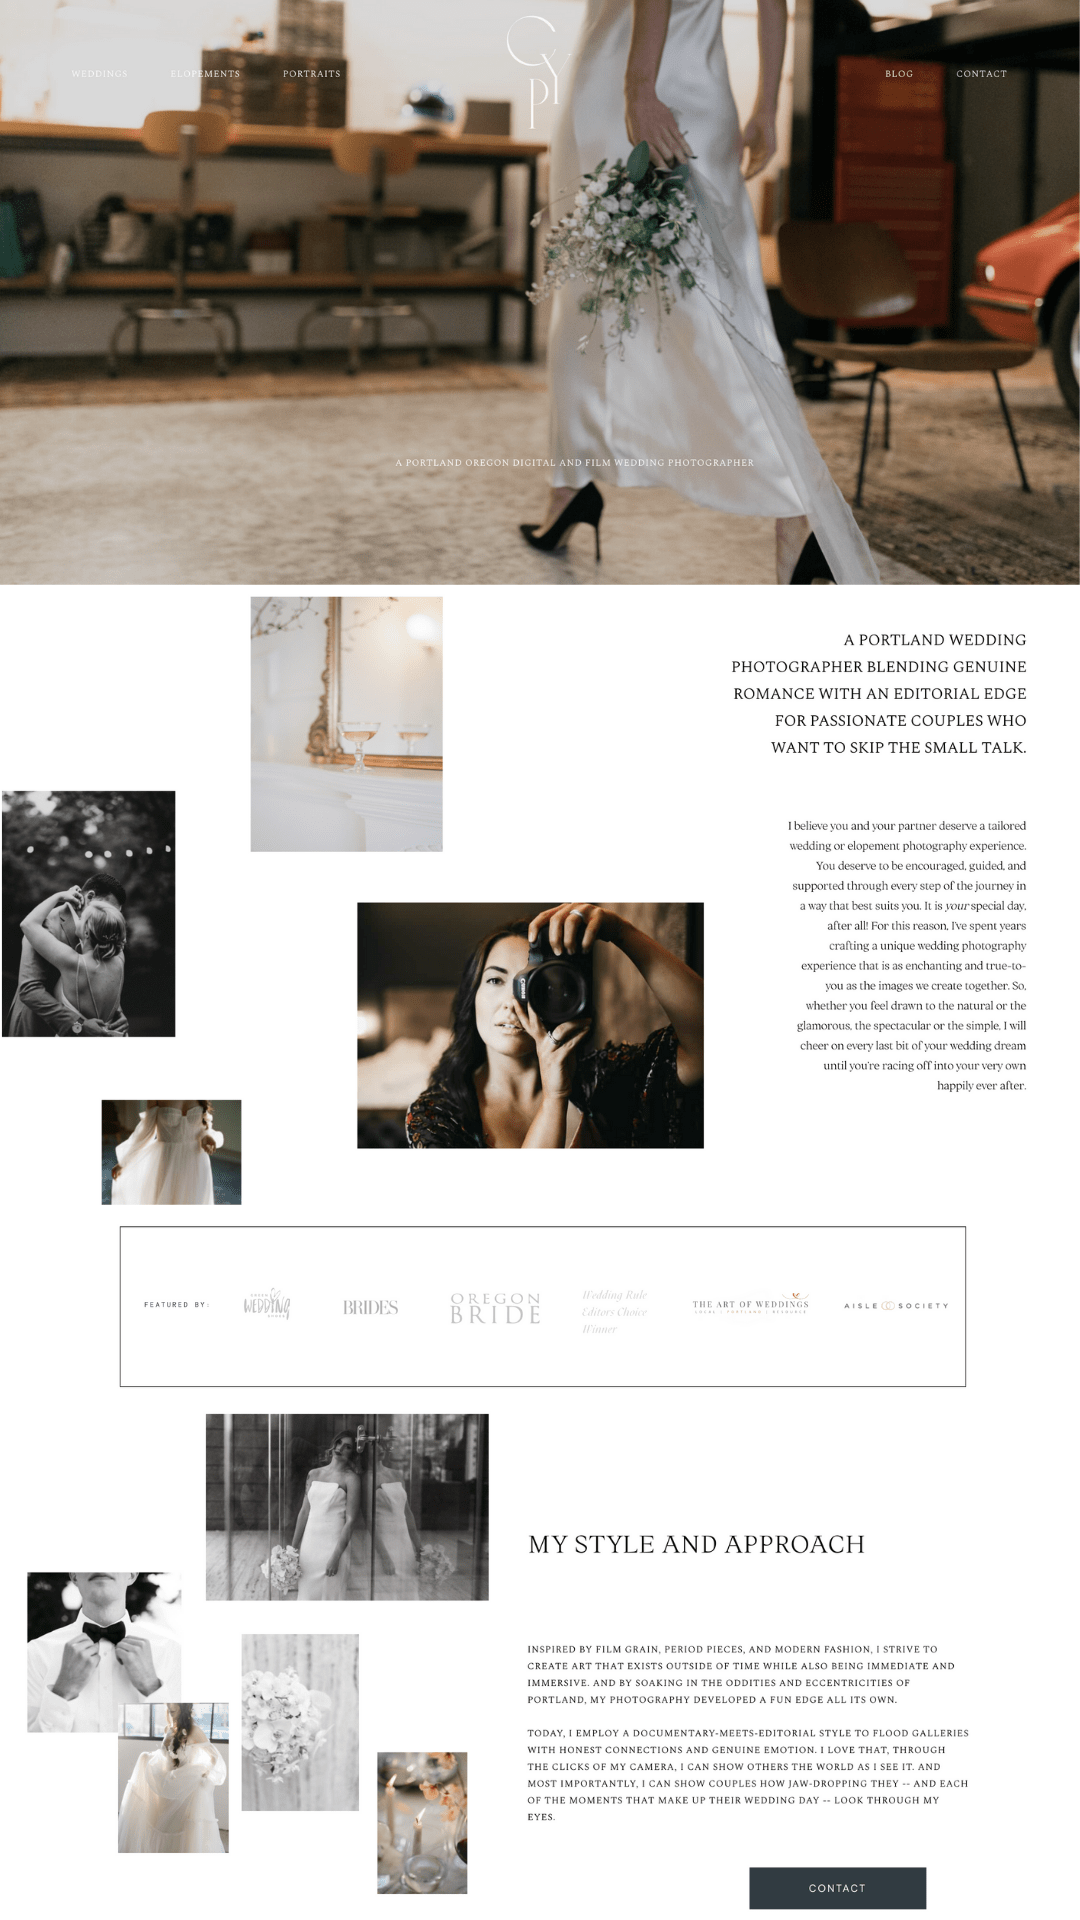 Create My Own Photography Website